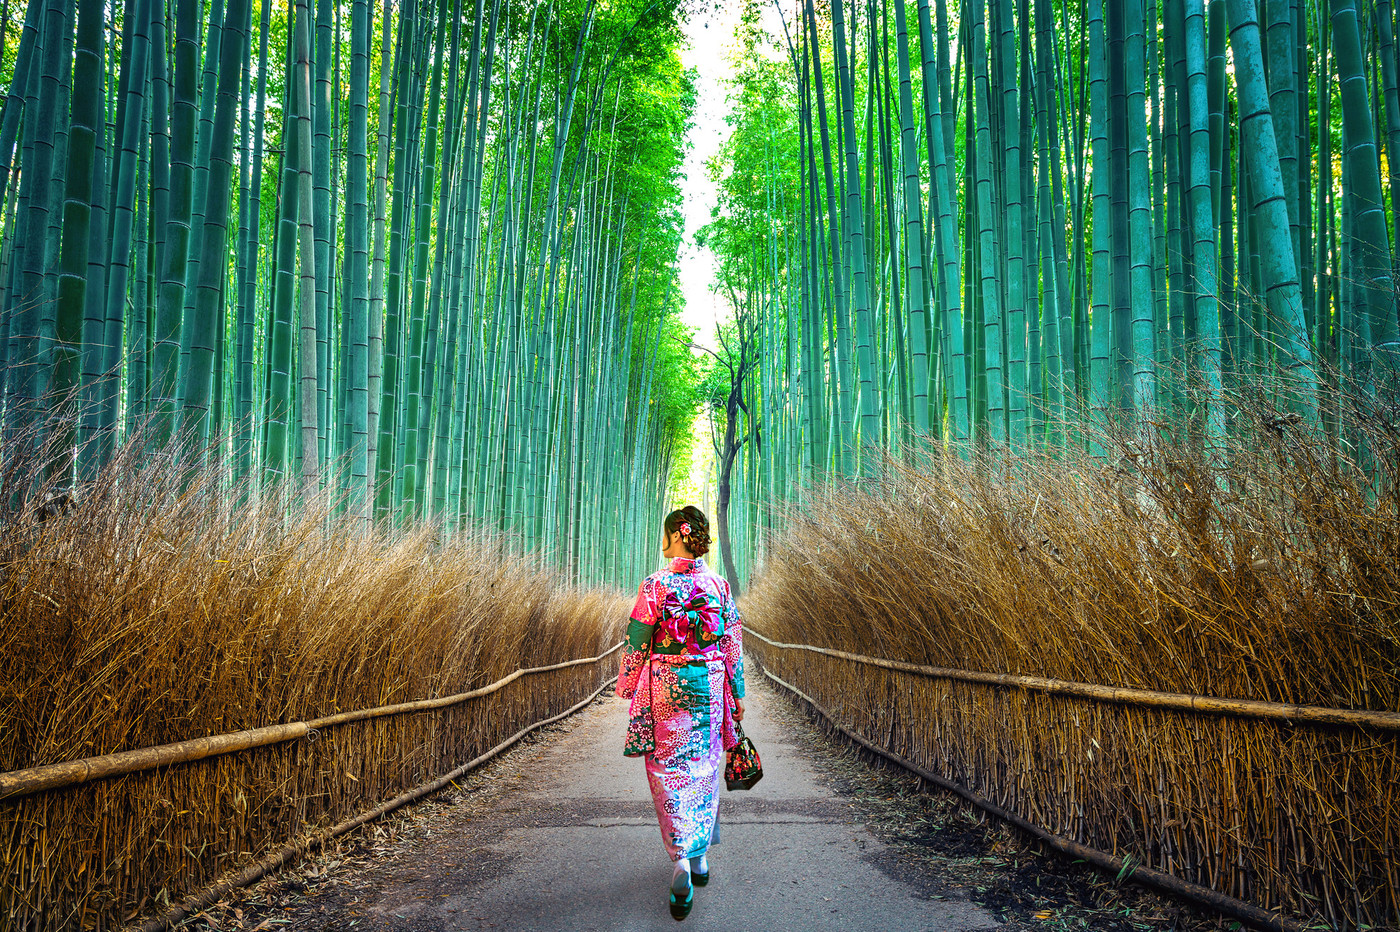 Bamboo Forest. Asian woman wearing japanese traditional kimono a